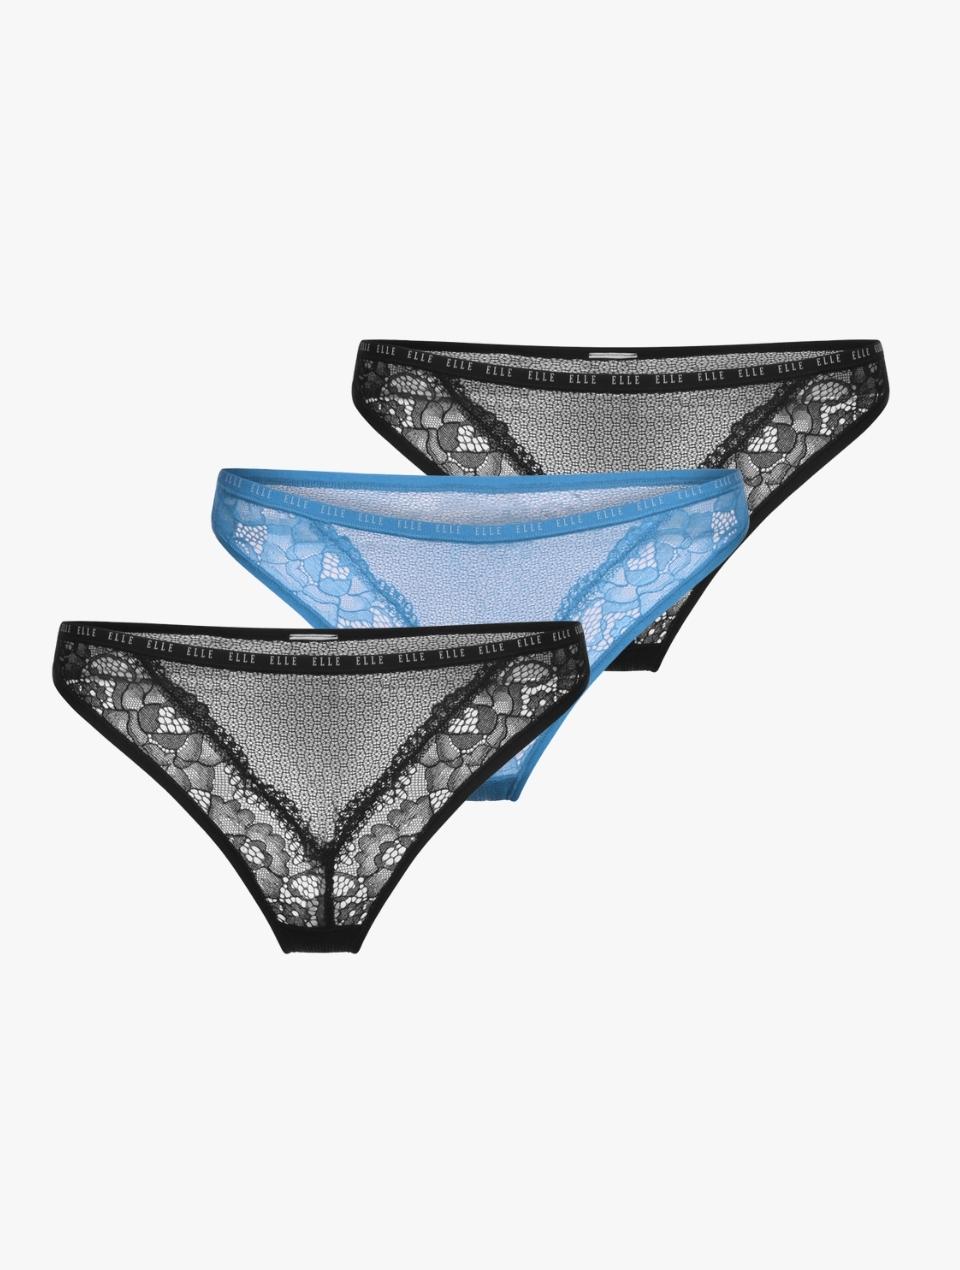 Lace thong in blue and black